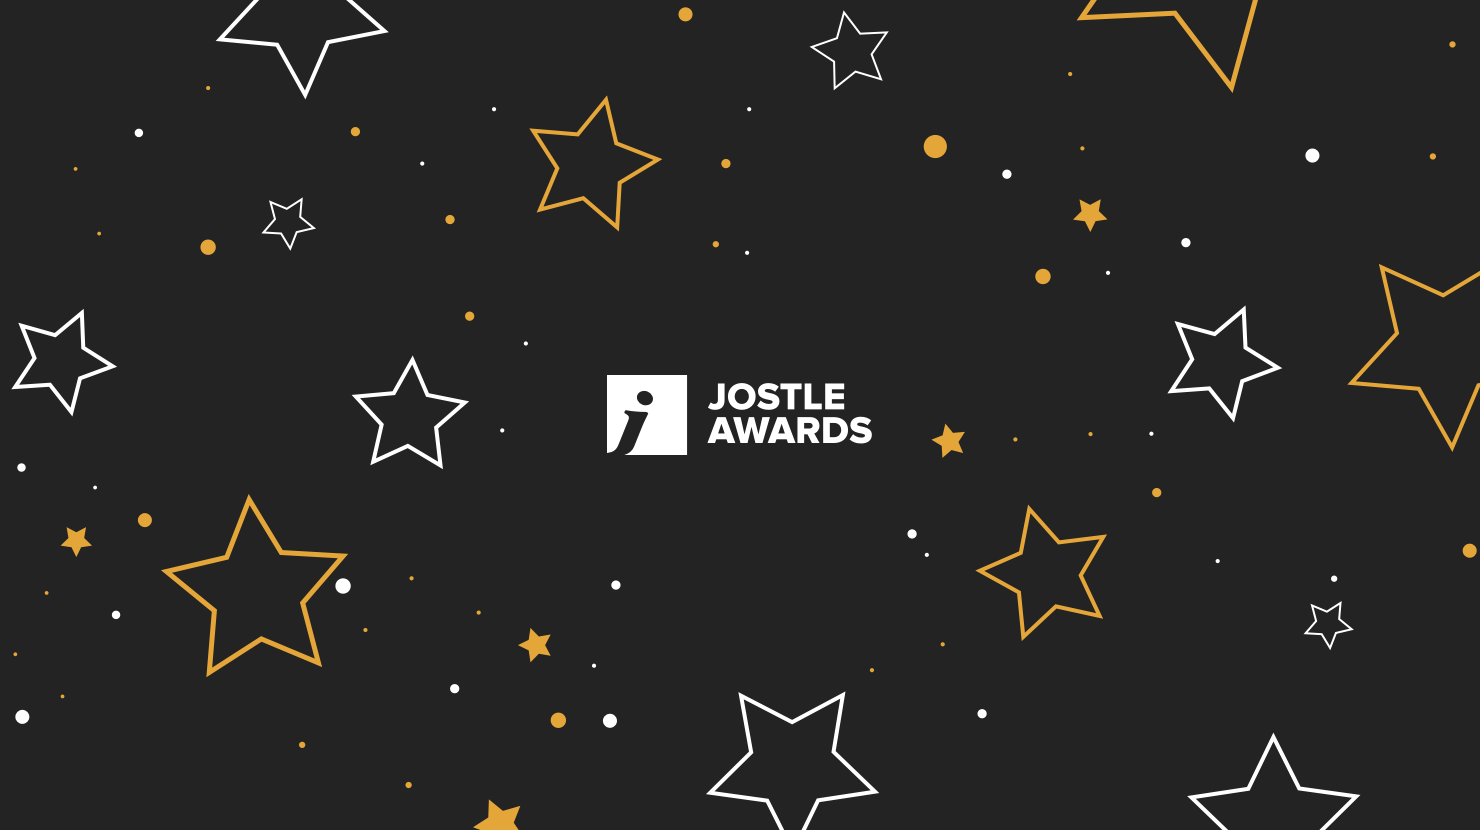 Jostle Awards 2017: Call for nominations!